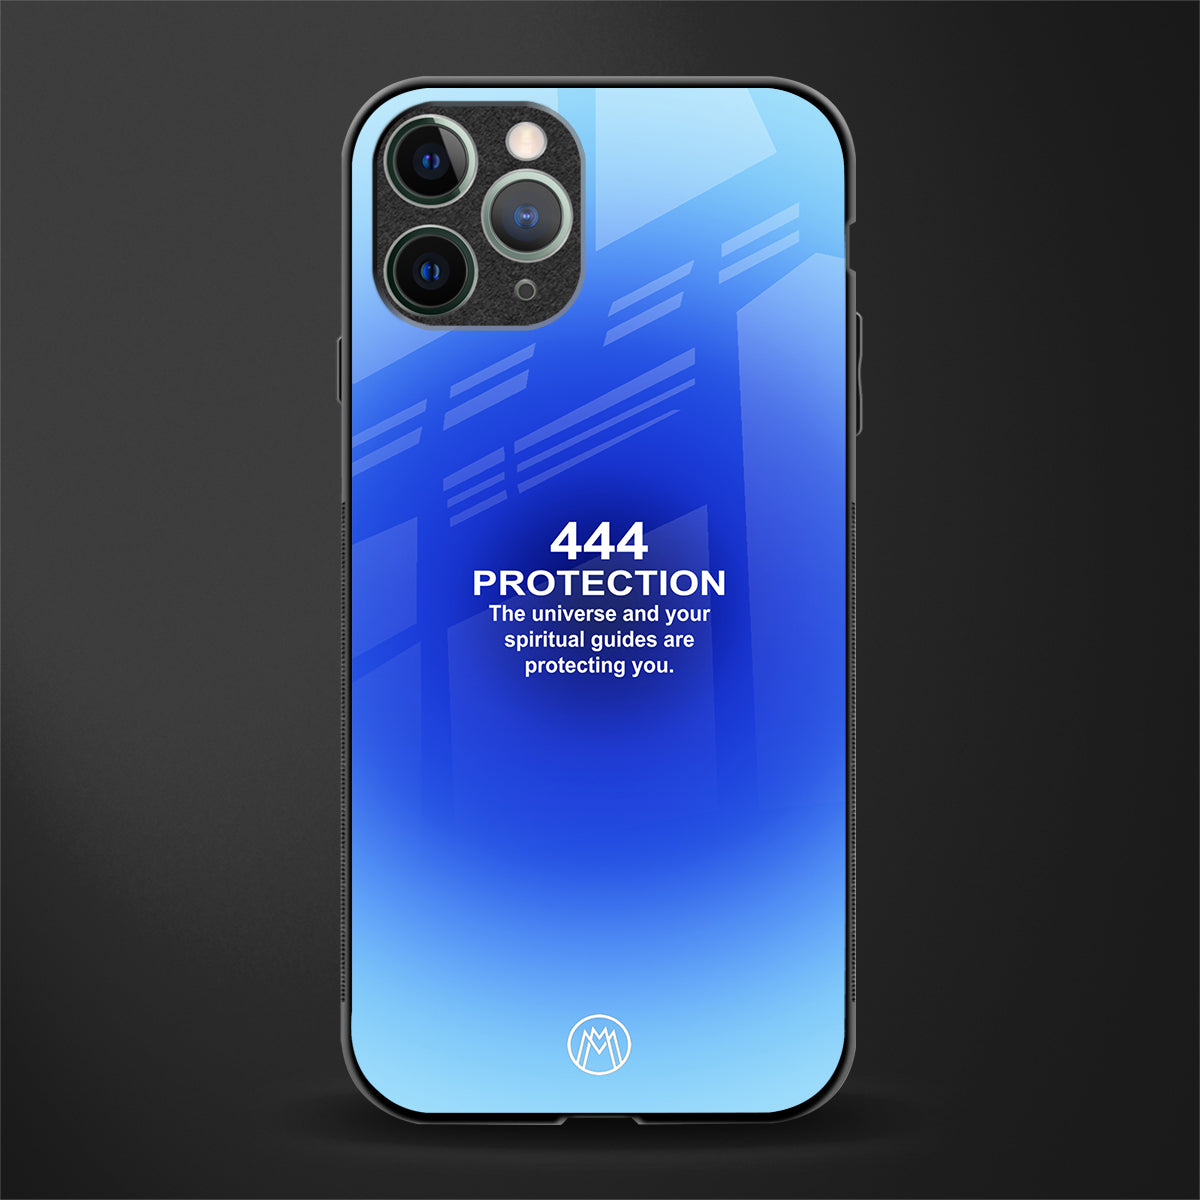 444 protection glass case for iphone 11 pro image